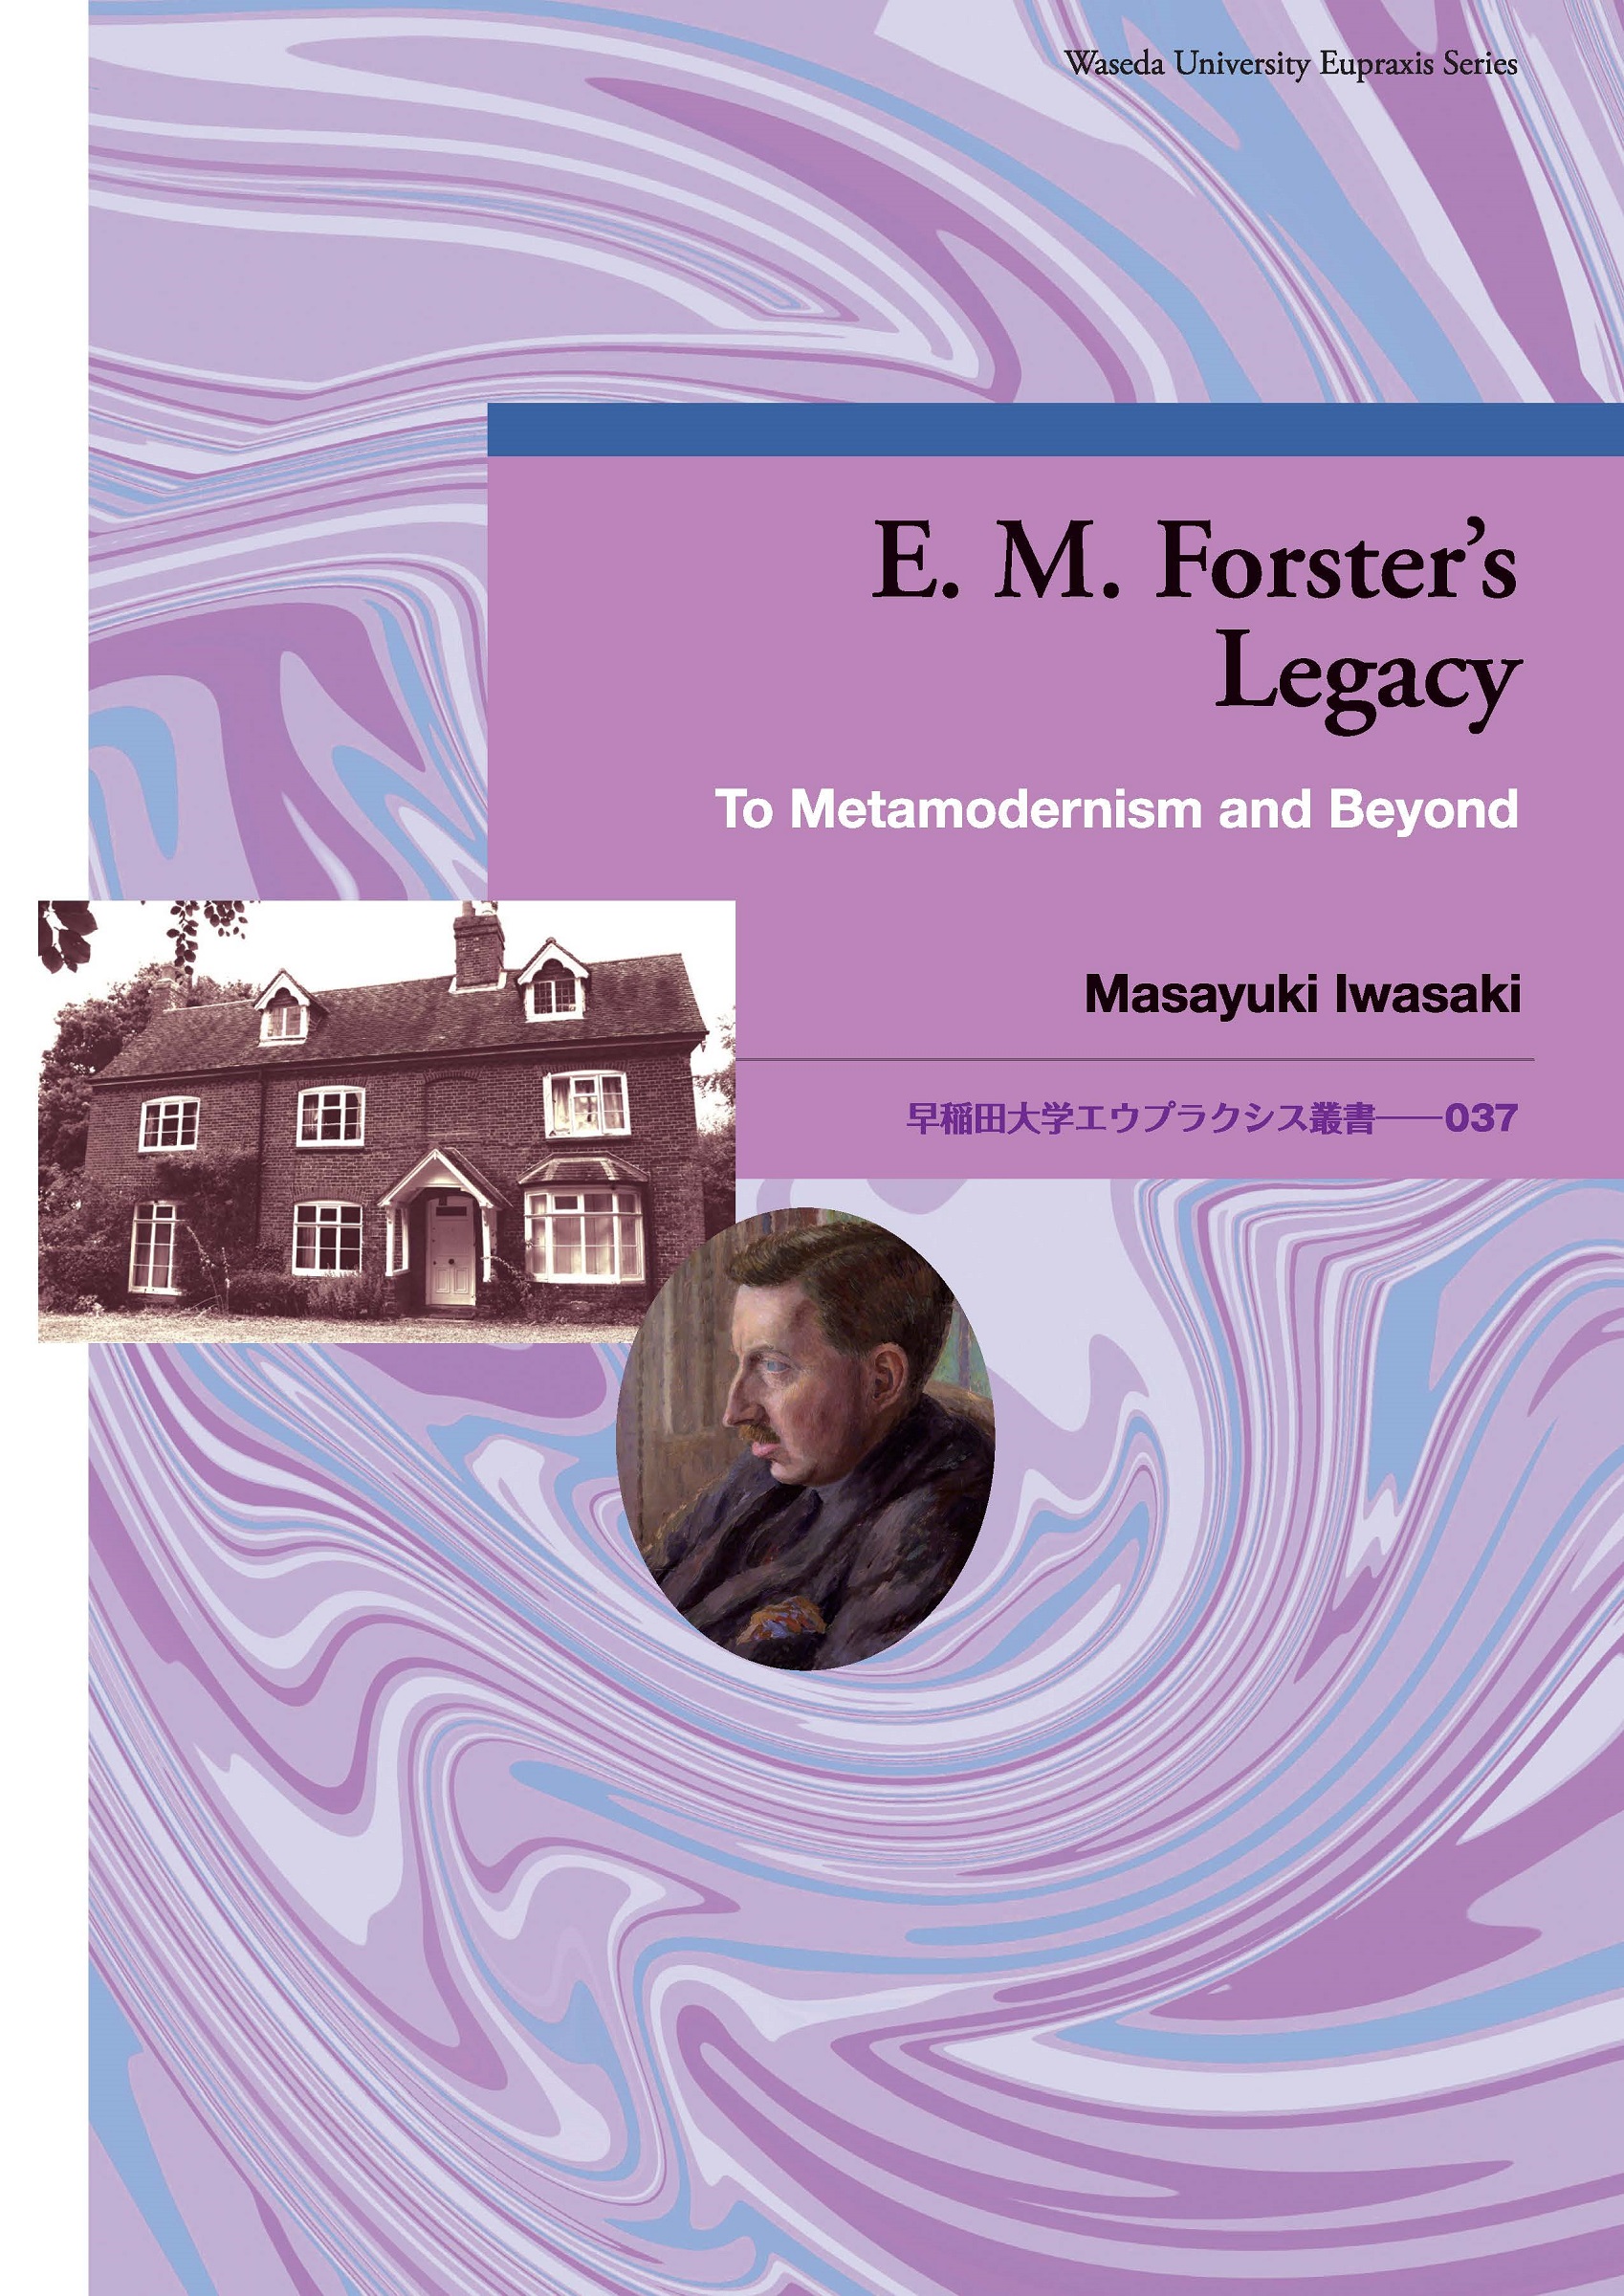 E. M. Forster's Legacyの商品画像